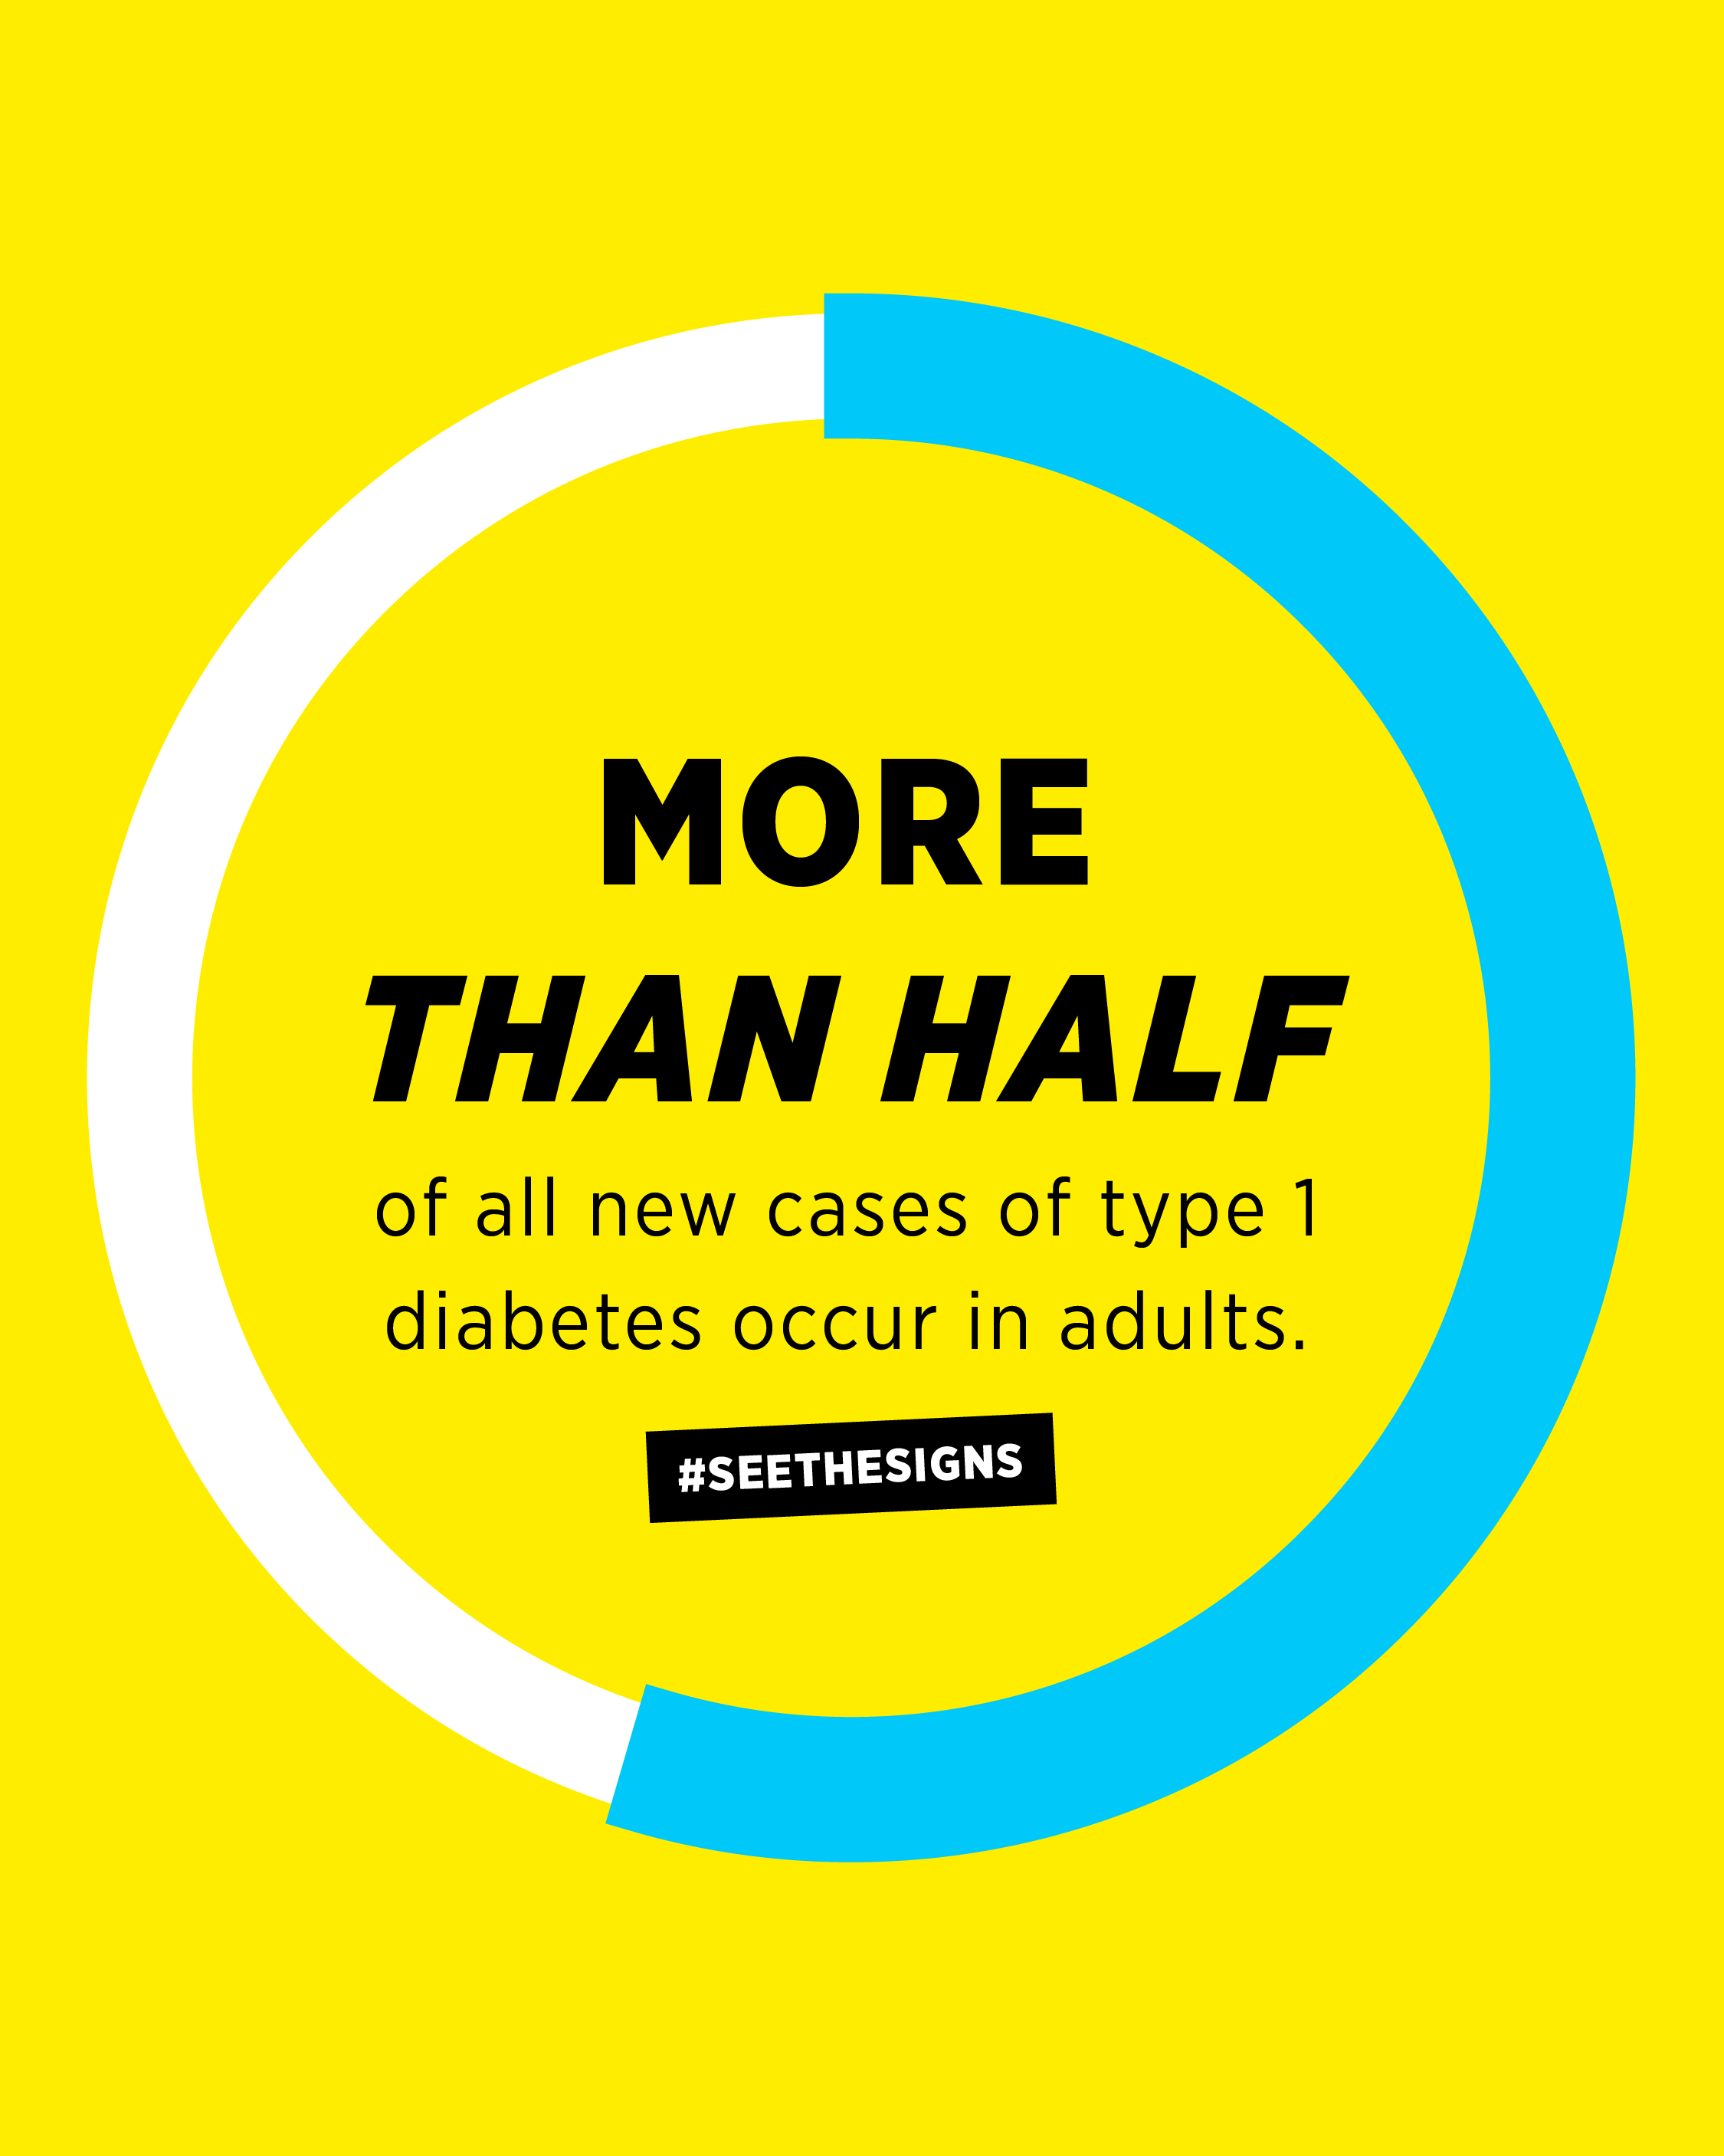 More than half of all the new cases of type 1 diabetes occur in adults